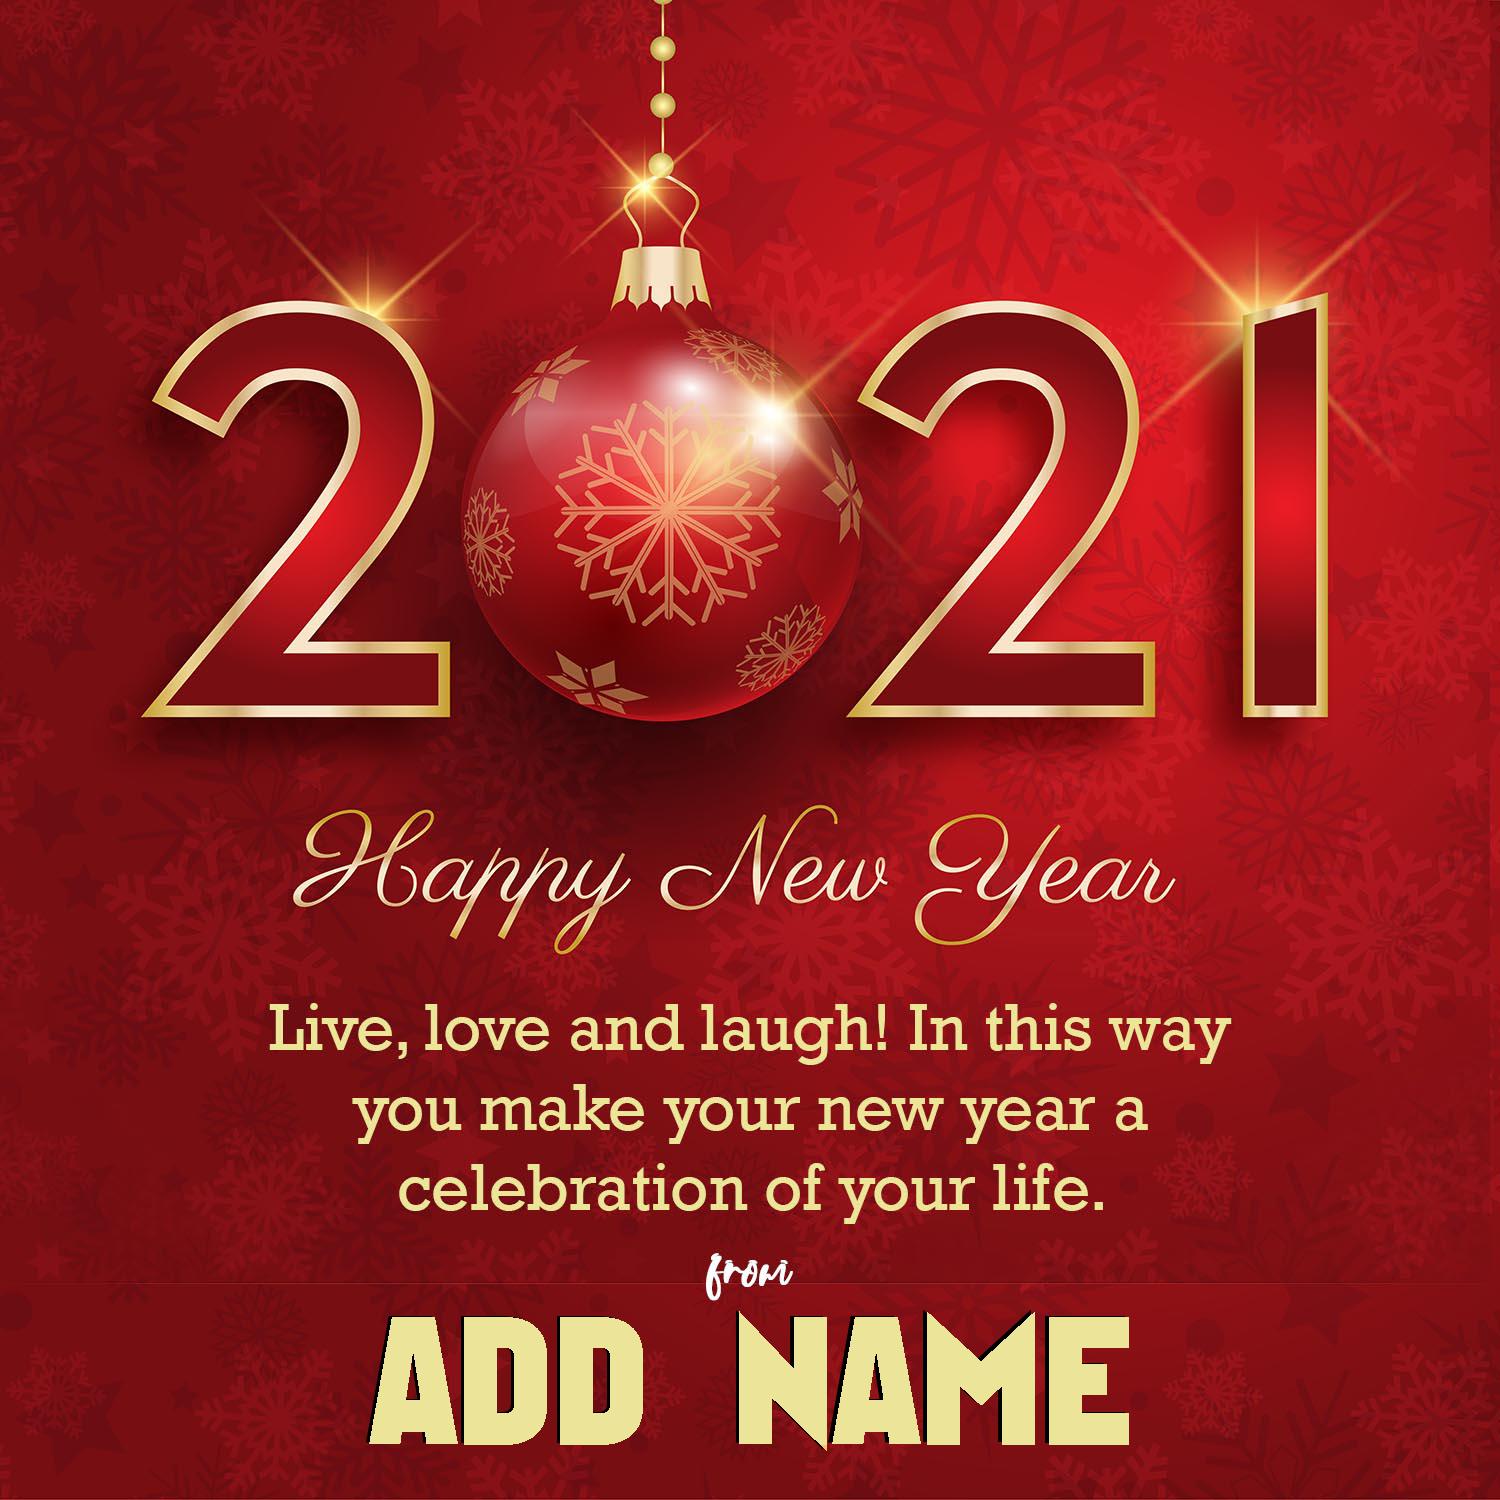 New Year Wishes Cards